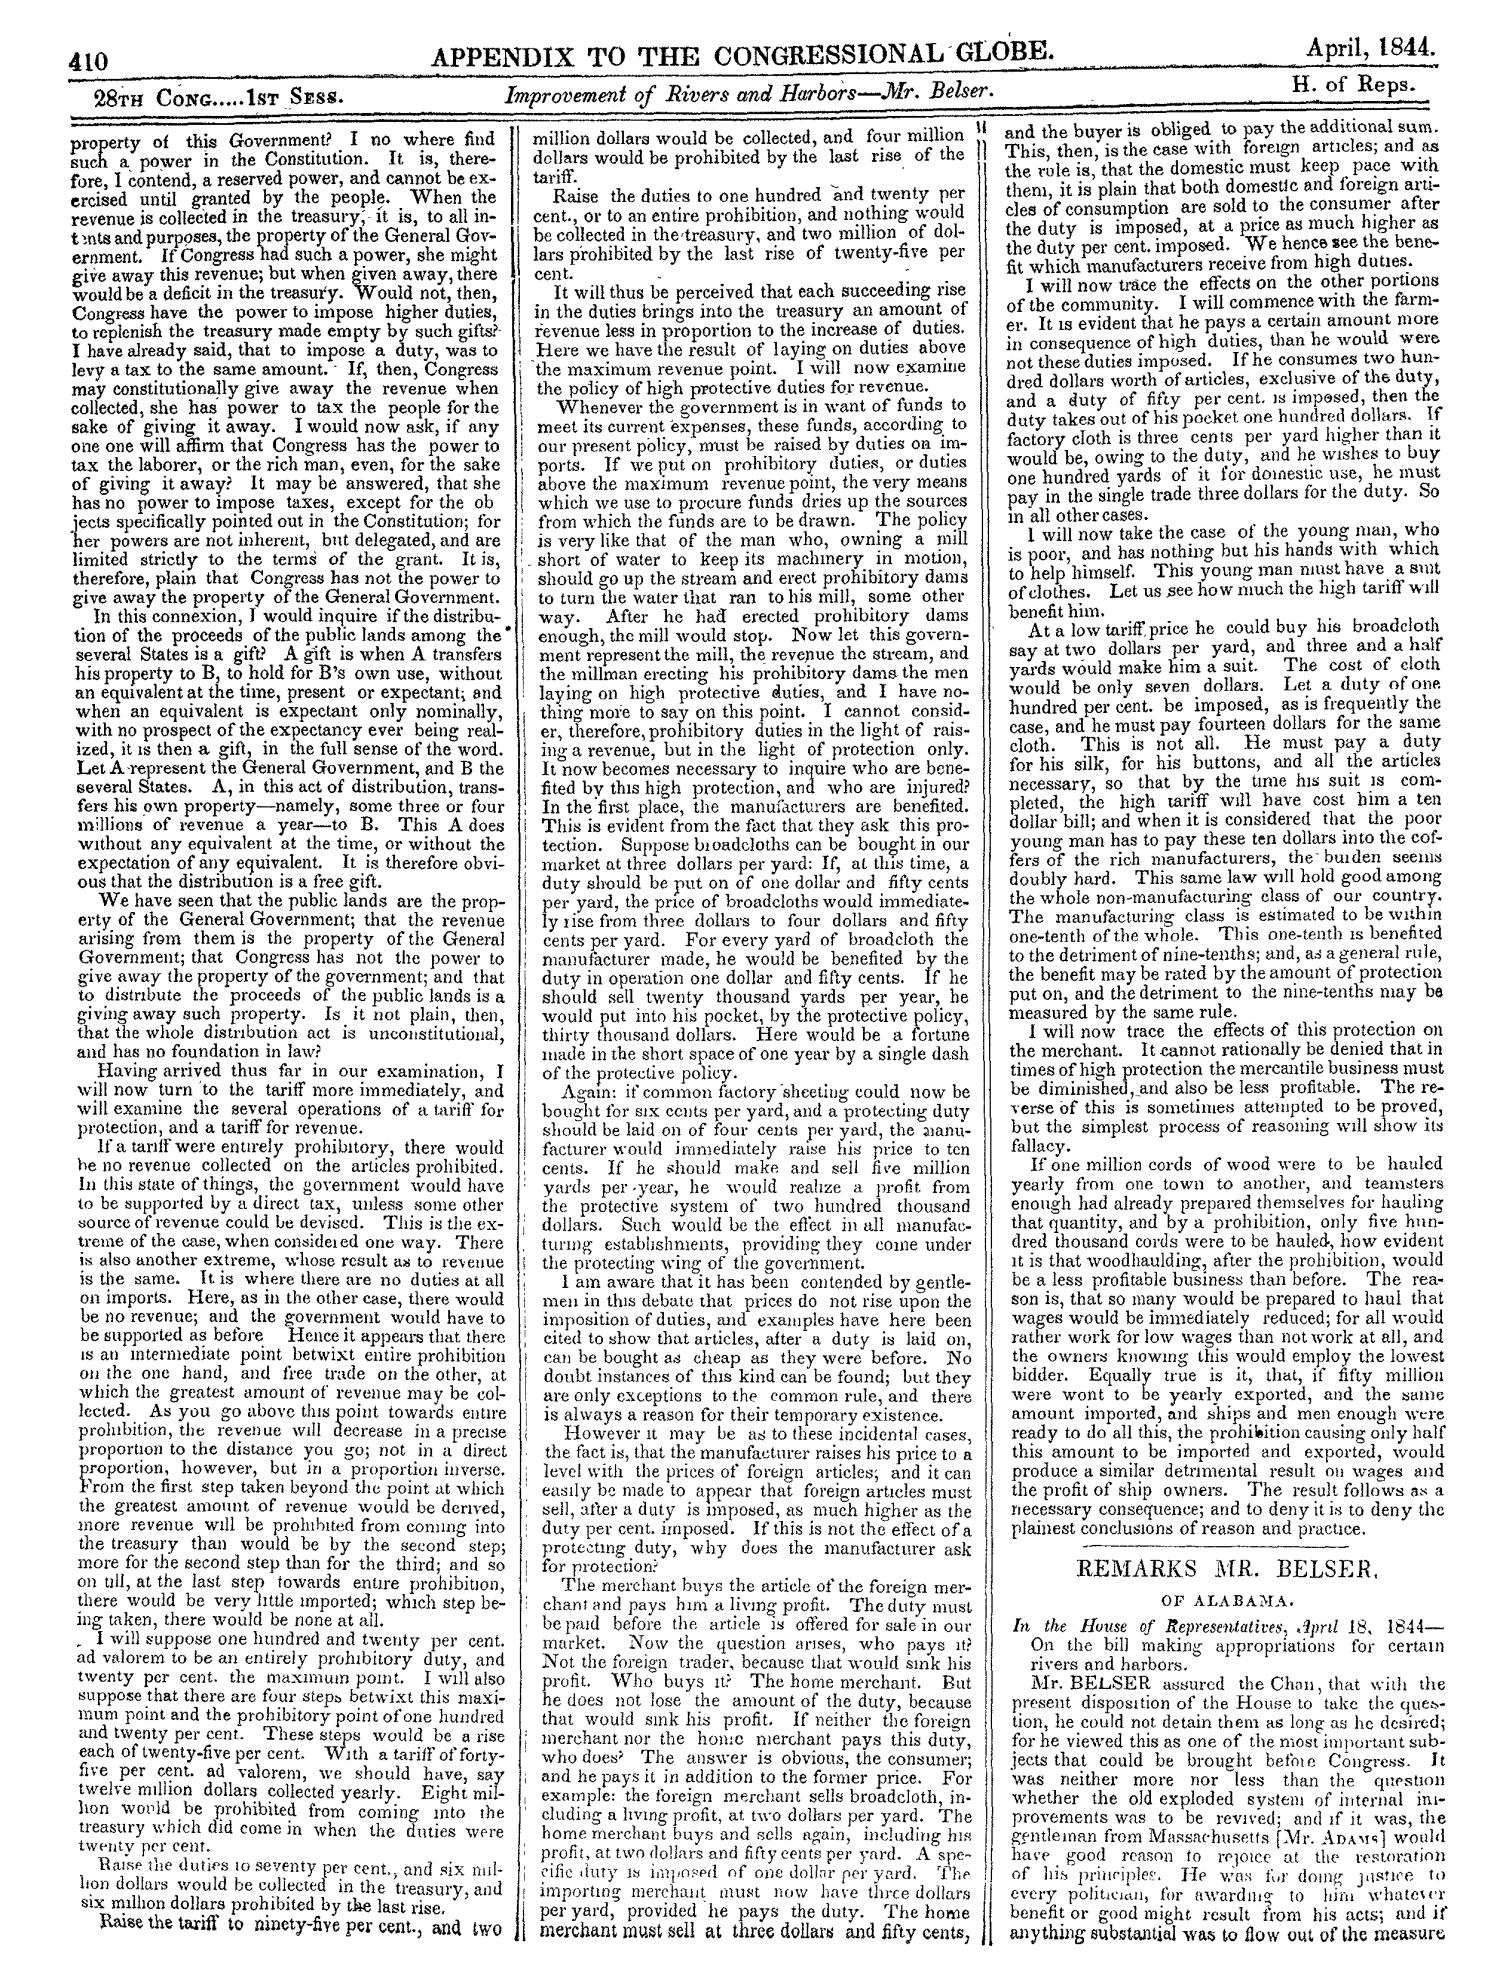 The Congressional Globe, Volume 13, Part 2: Twenty-Eighth Congress, First Session
                                                
                                                    410
                                                